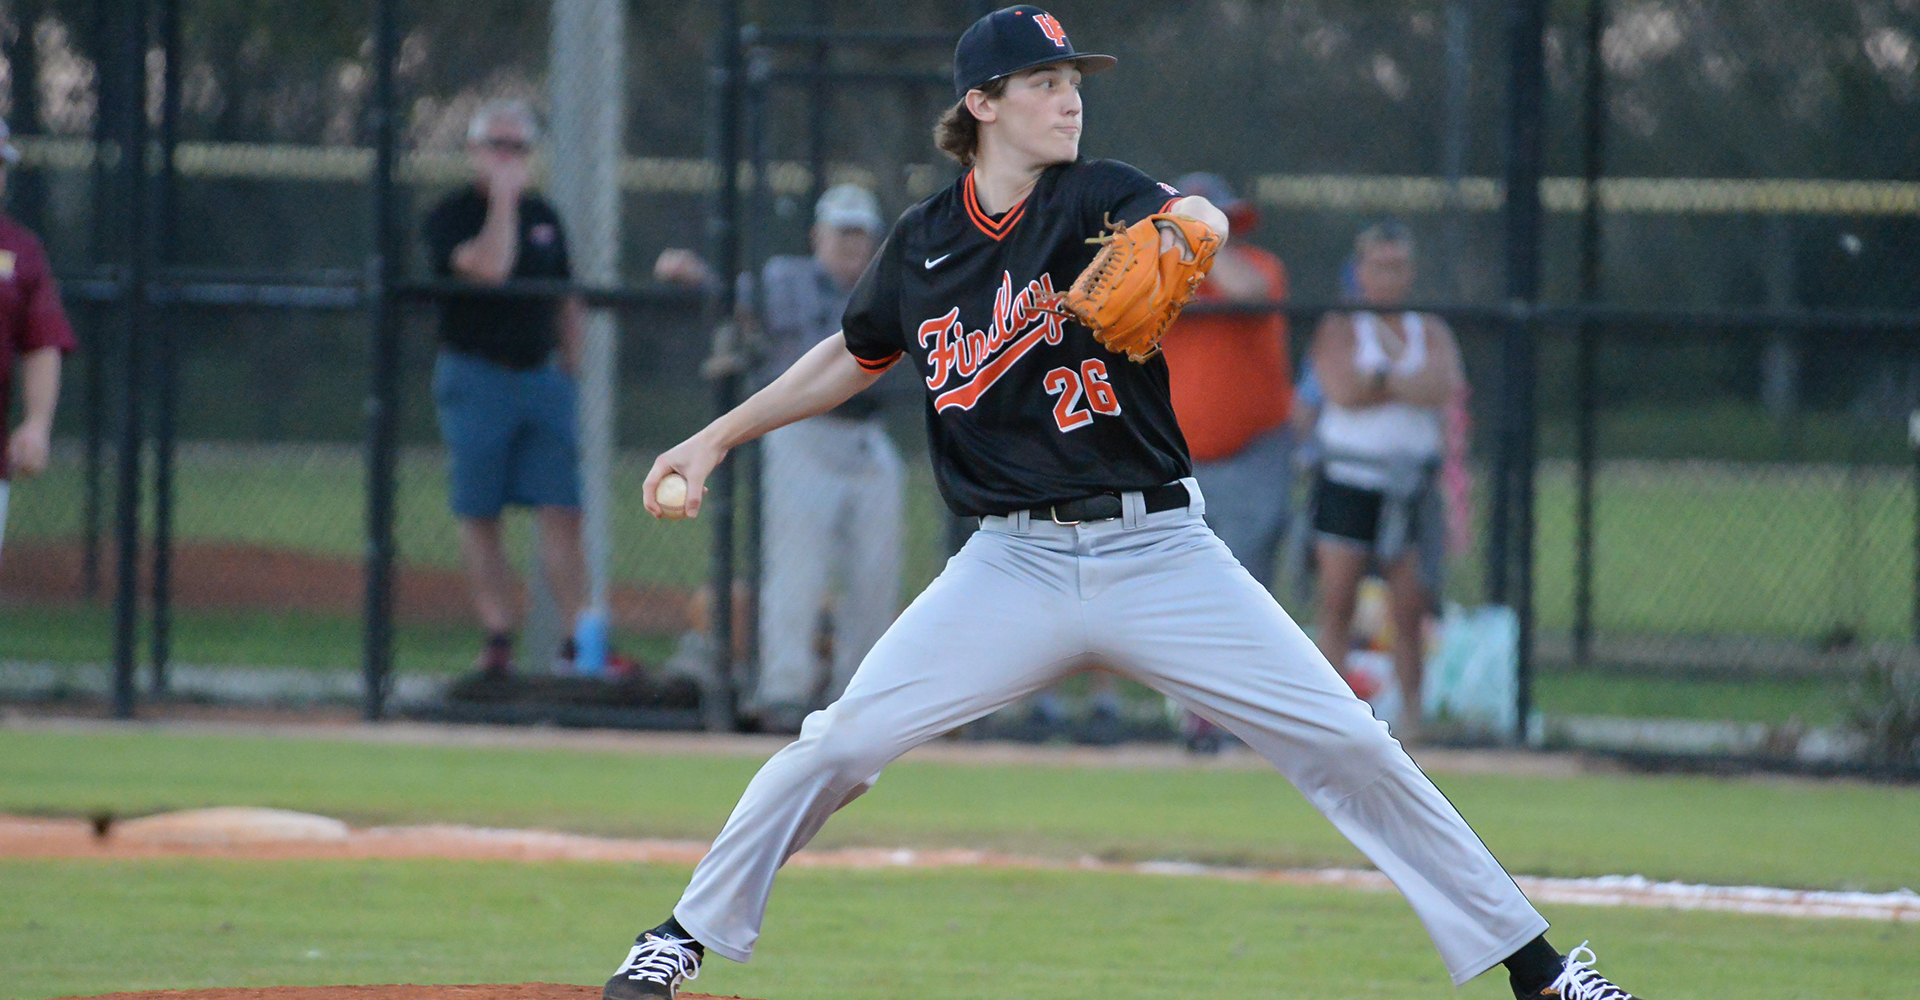 Oilers Defeat Railsplitters Behind Four-Inning Relief Effort by Bame